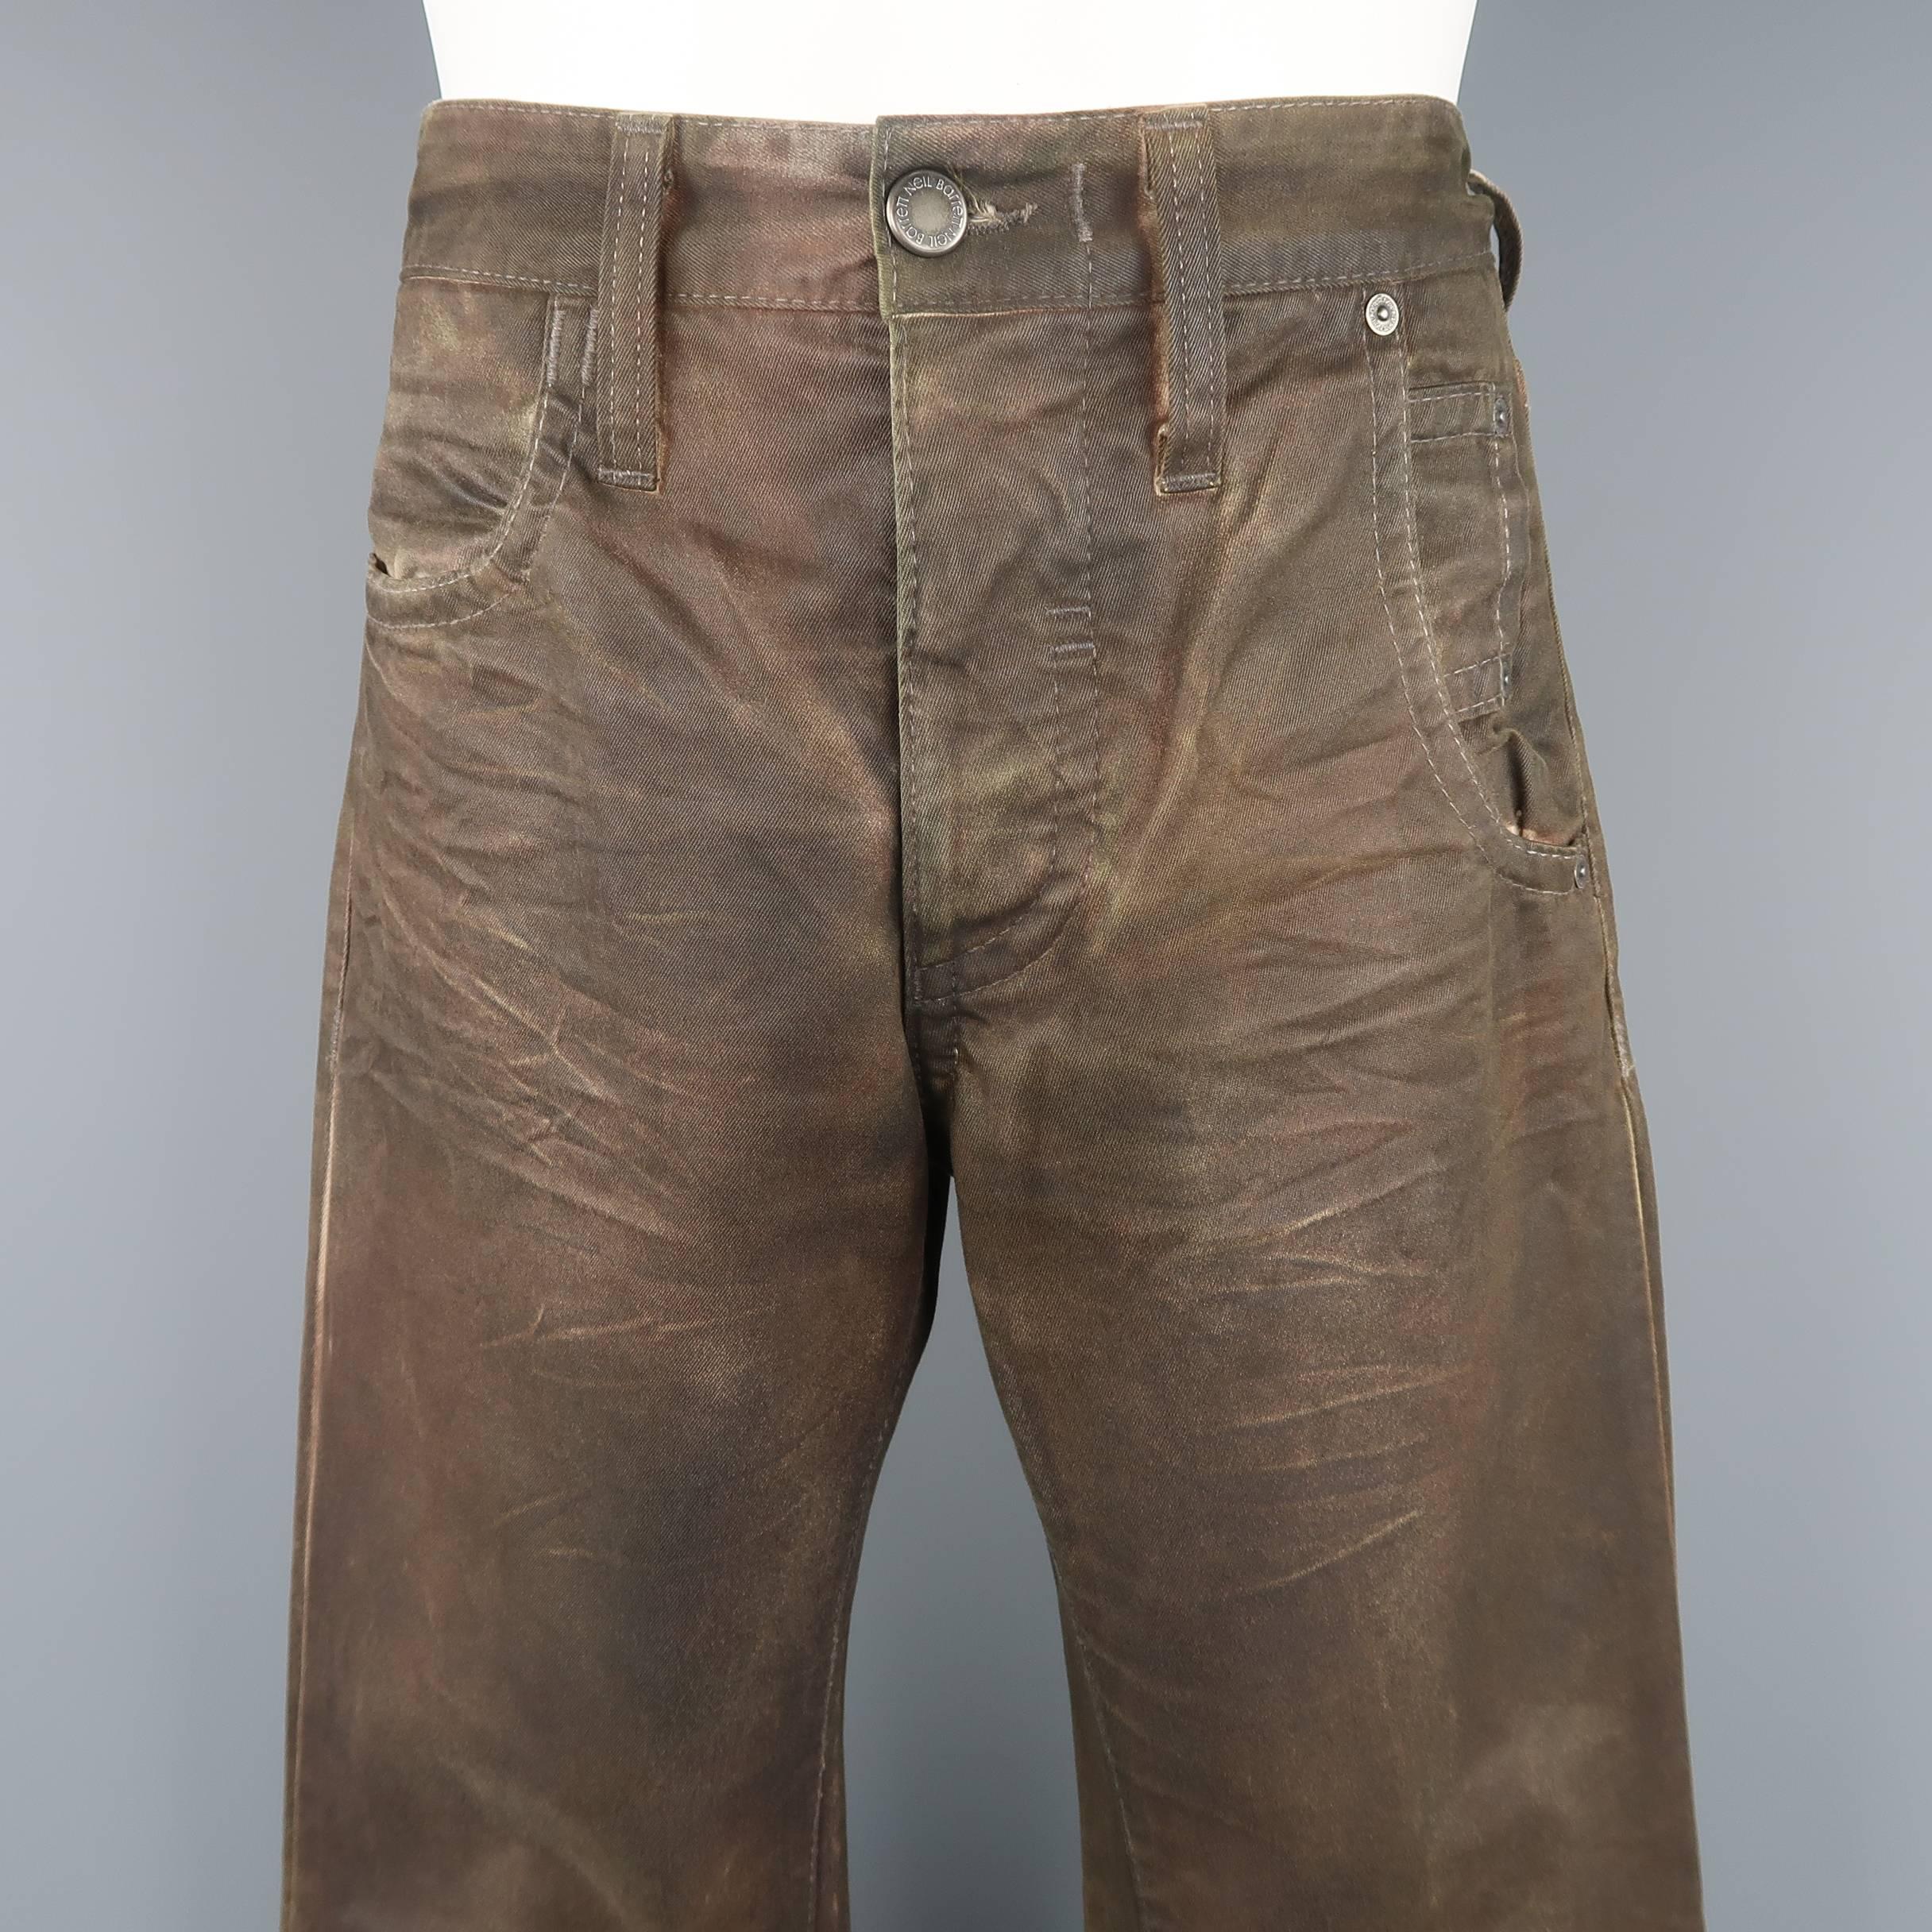 NEIL BARRETT jeans come in cotton twill denim with all over distressed brown and olive paint. Circa 2004. Made in Italy.
 
Good Pre-Owned Condition.
Marked: 31
 
Measurements:
 
Waist: 31 in.
Rise: 10.5 in.
Inseam: 32 in.
